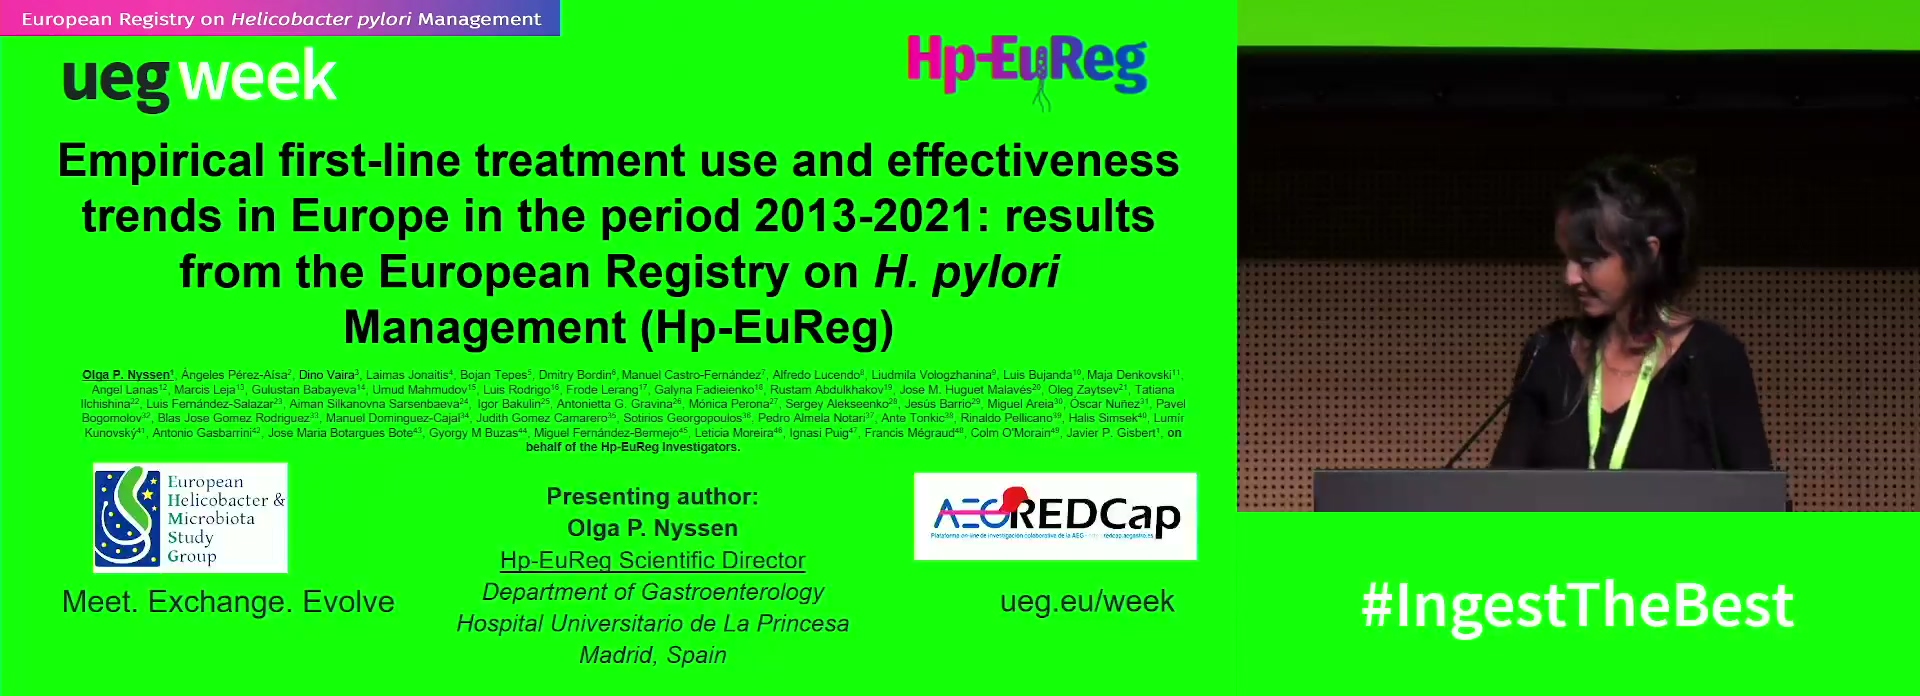 EMPIRICAL FIRST-LINE TREATMENT USE AND EFFECTIVENESS TRENDS IN EUROPE IN THE PERIOD 2013-2021: RESULTS FROM THE EUROPEAN REGISTRY ON H. PYLORI MANAGEMENT (HP-EUREG)